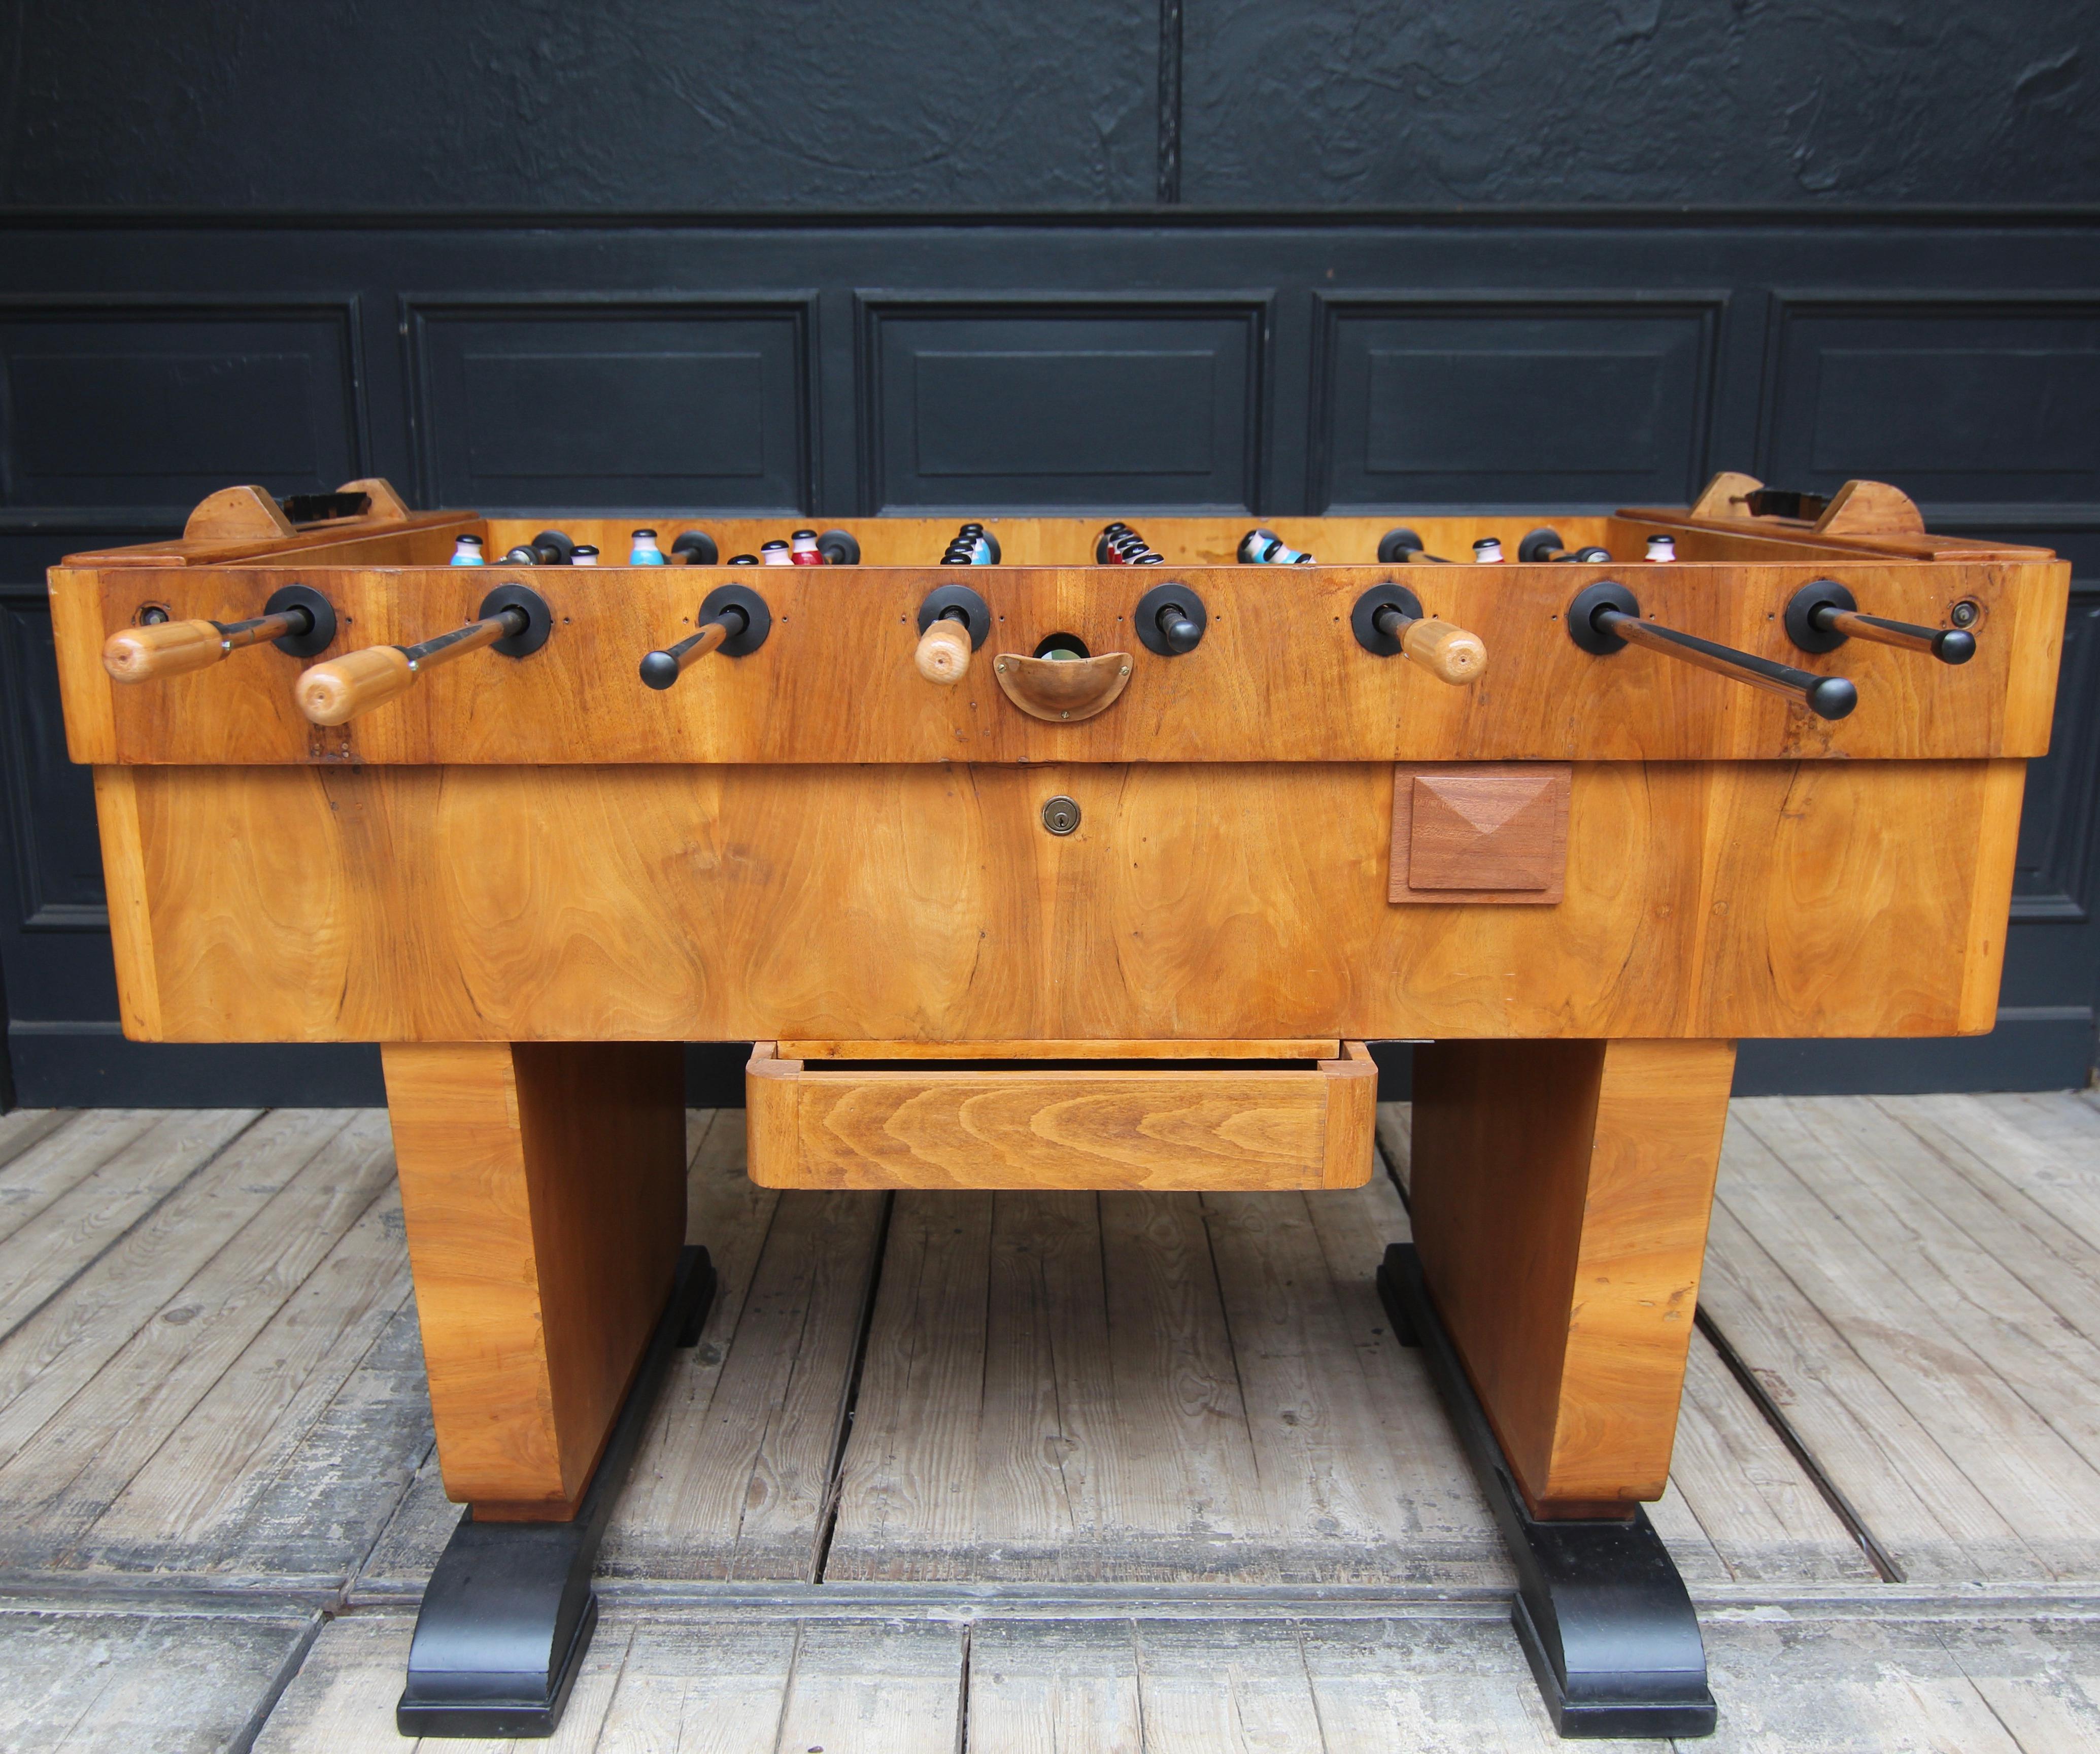 German 50s foosball table. Attributable to the manufacturer Leonhart, who has stood for the best quality and innovation in the field of foosball tables since the founding of the family business in 1949.

Restored condition. Among other things, the